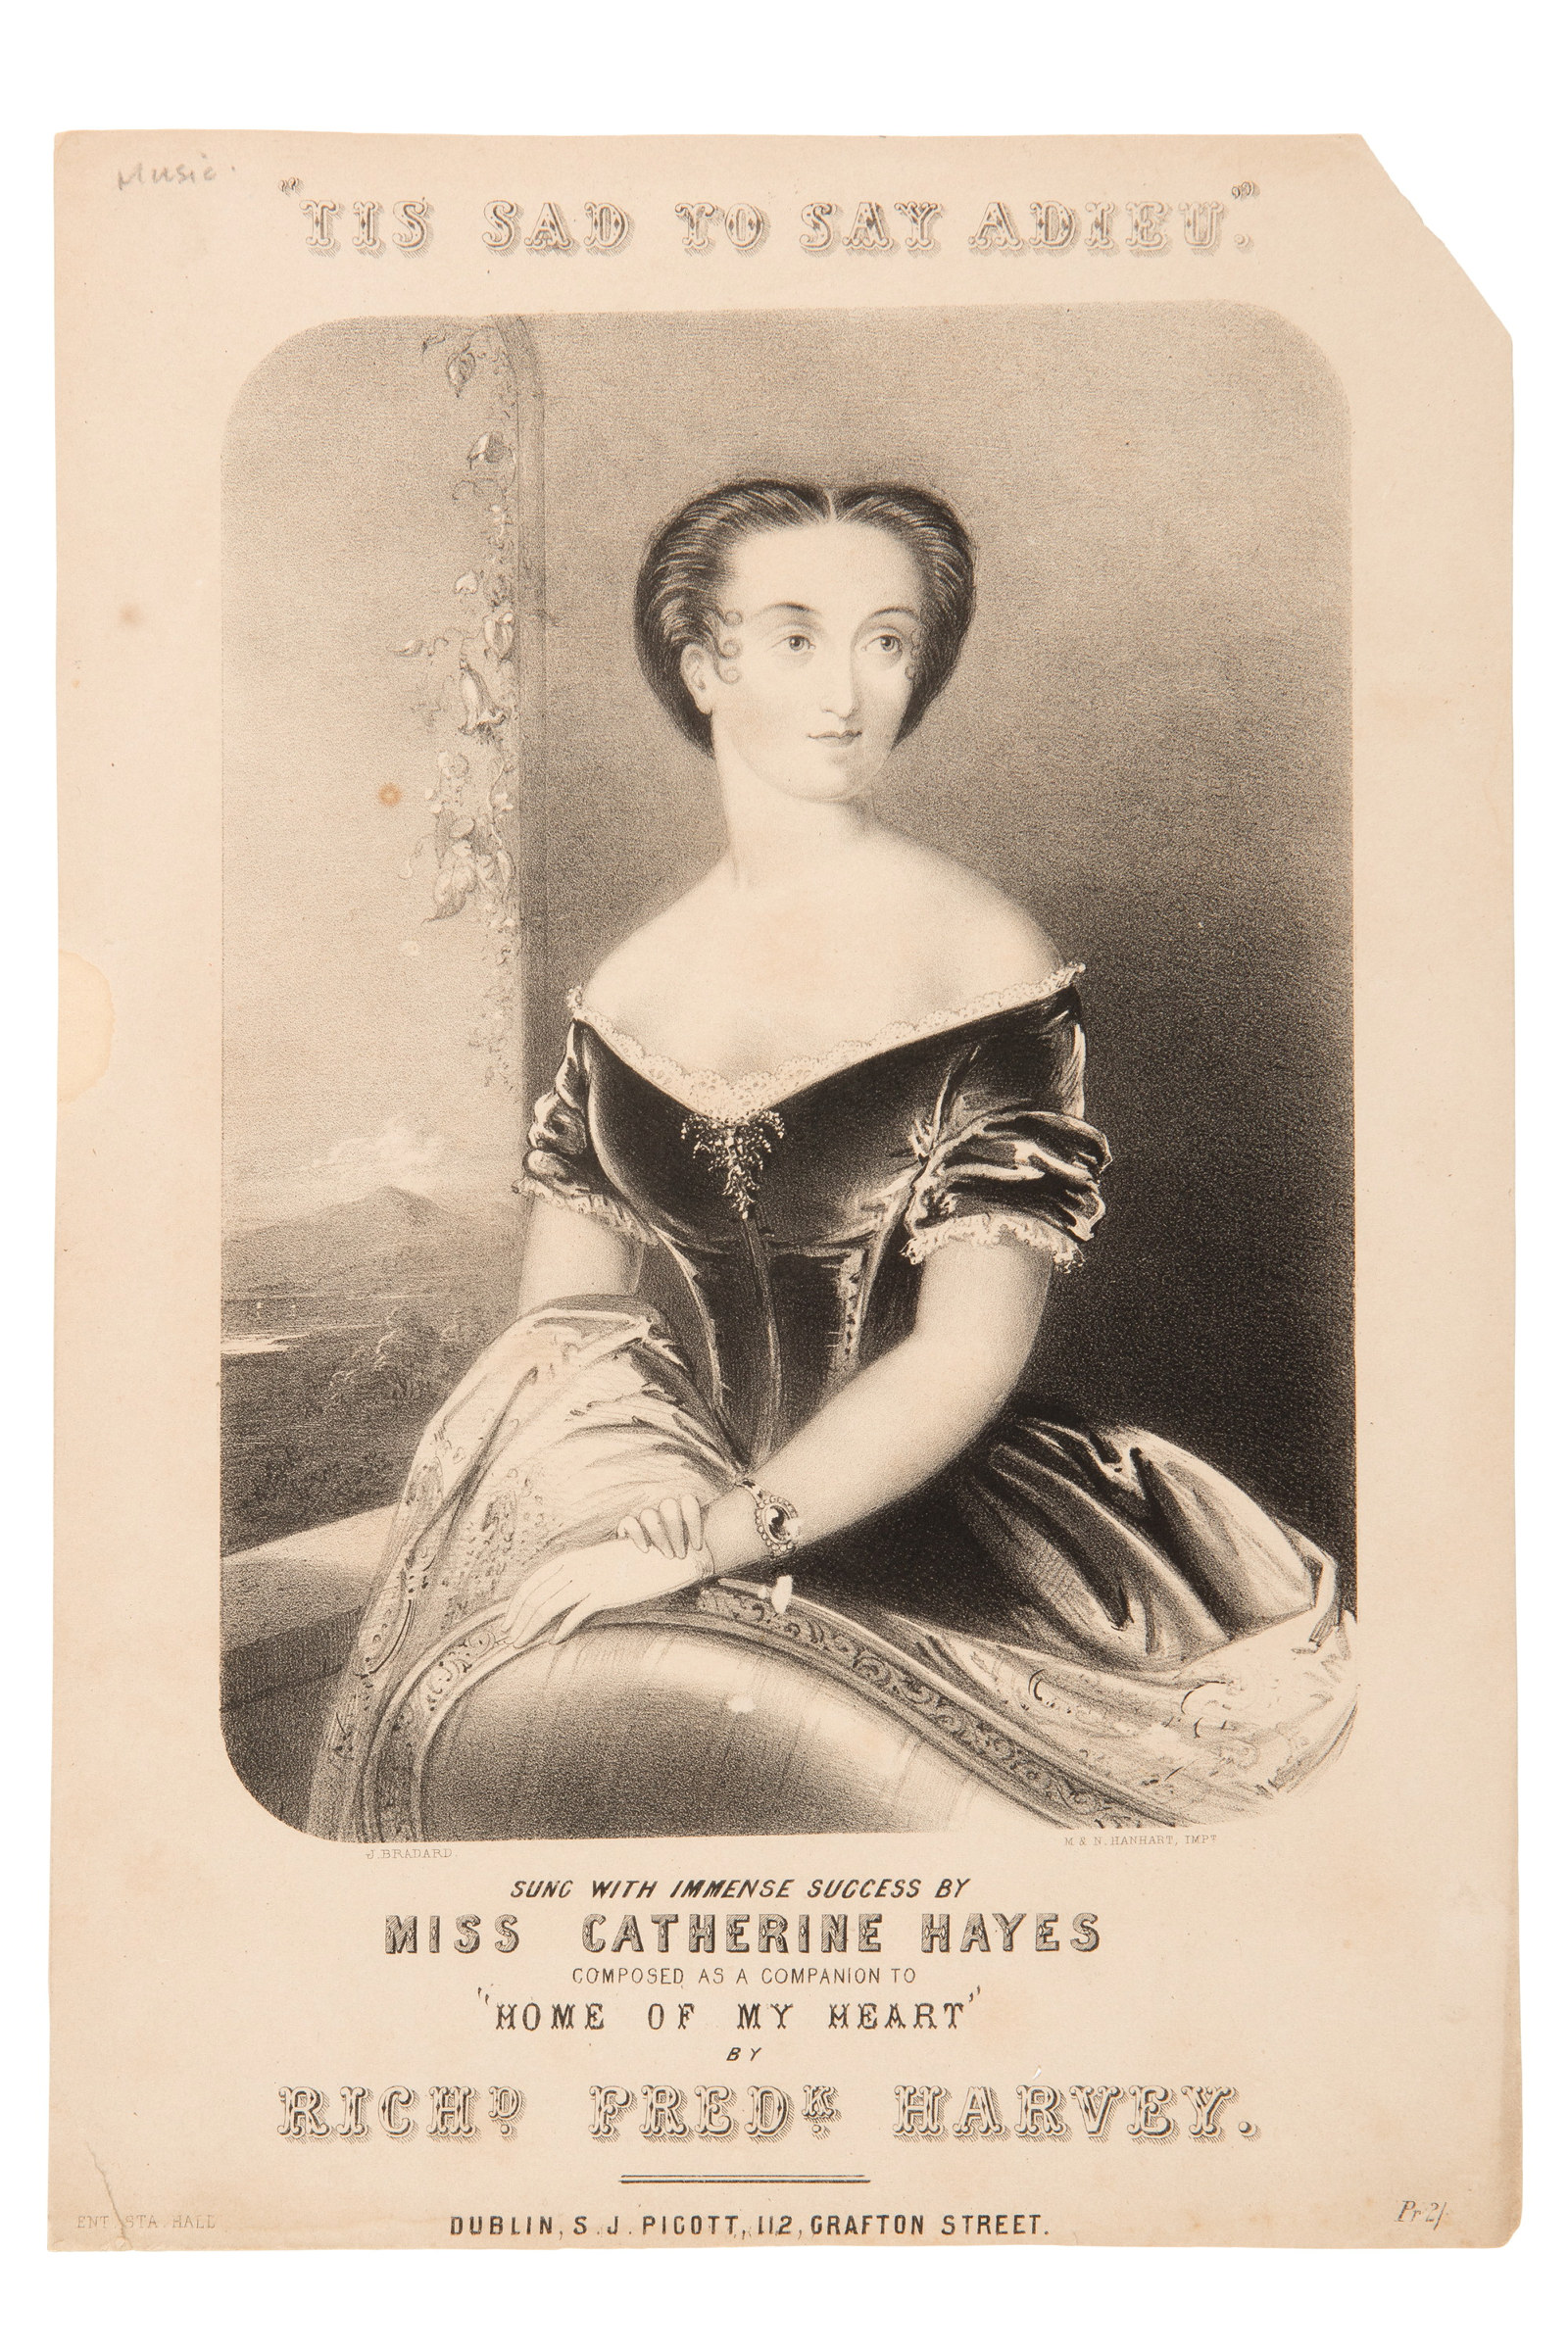 Illustrated portrait of woman with hair up in bun, wearing dark dress - framed by title of sheet music and publishing details.